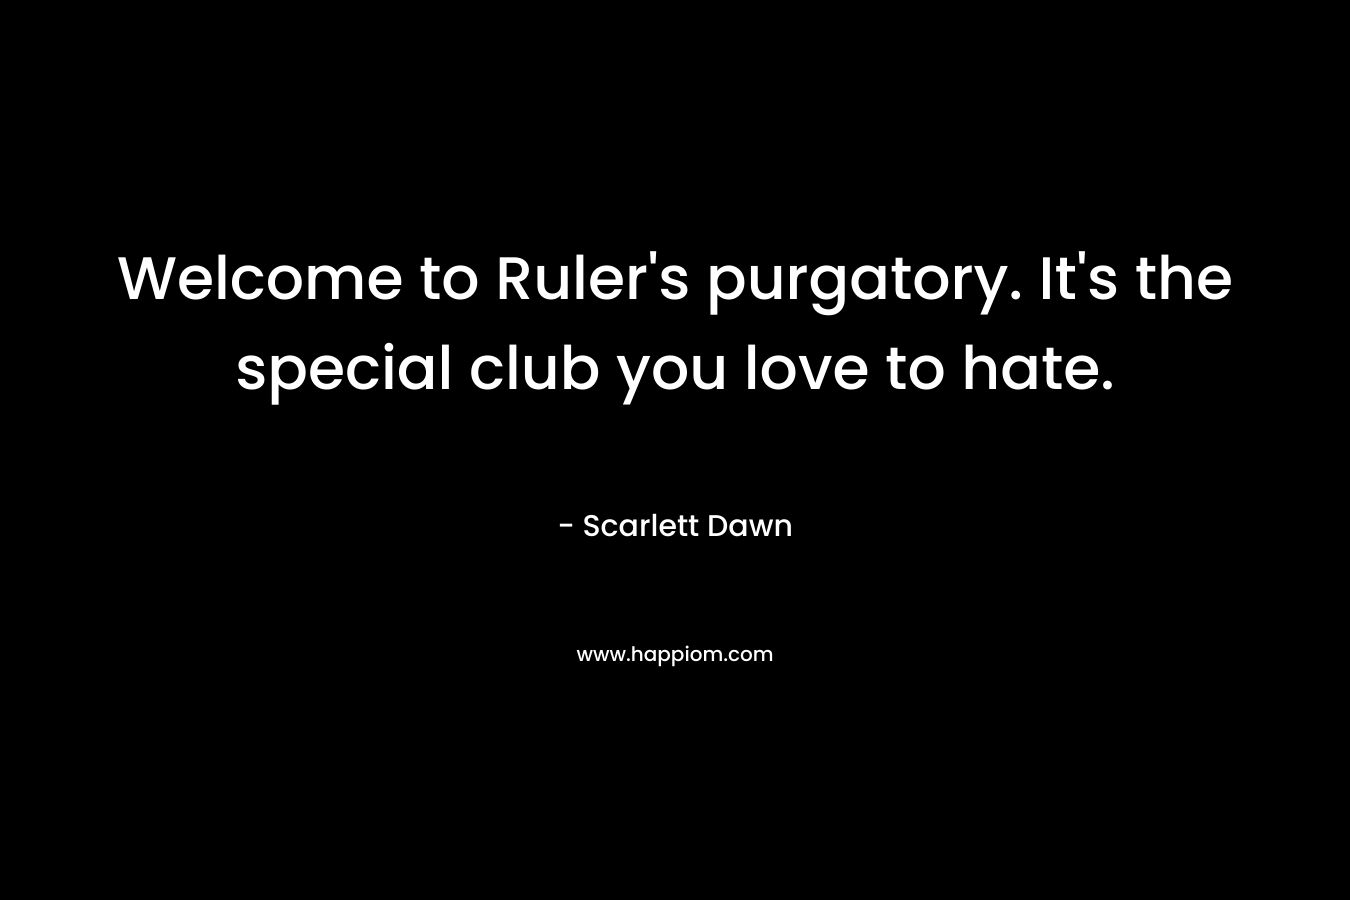 Welcome to Ruler's purgatory. It's the special club you love to hate.